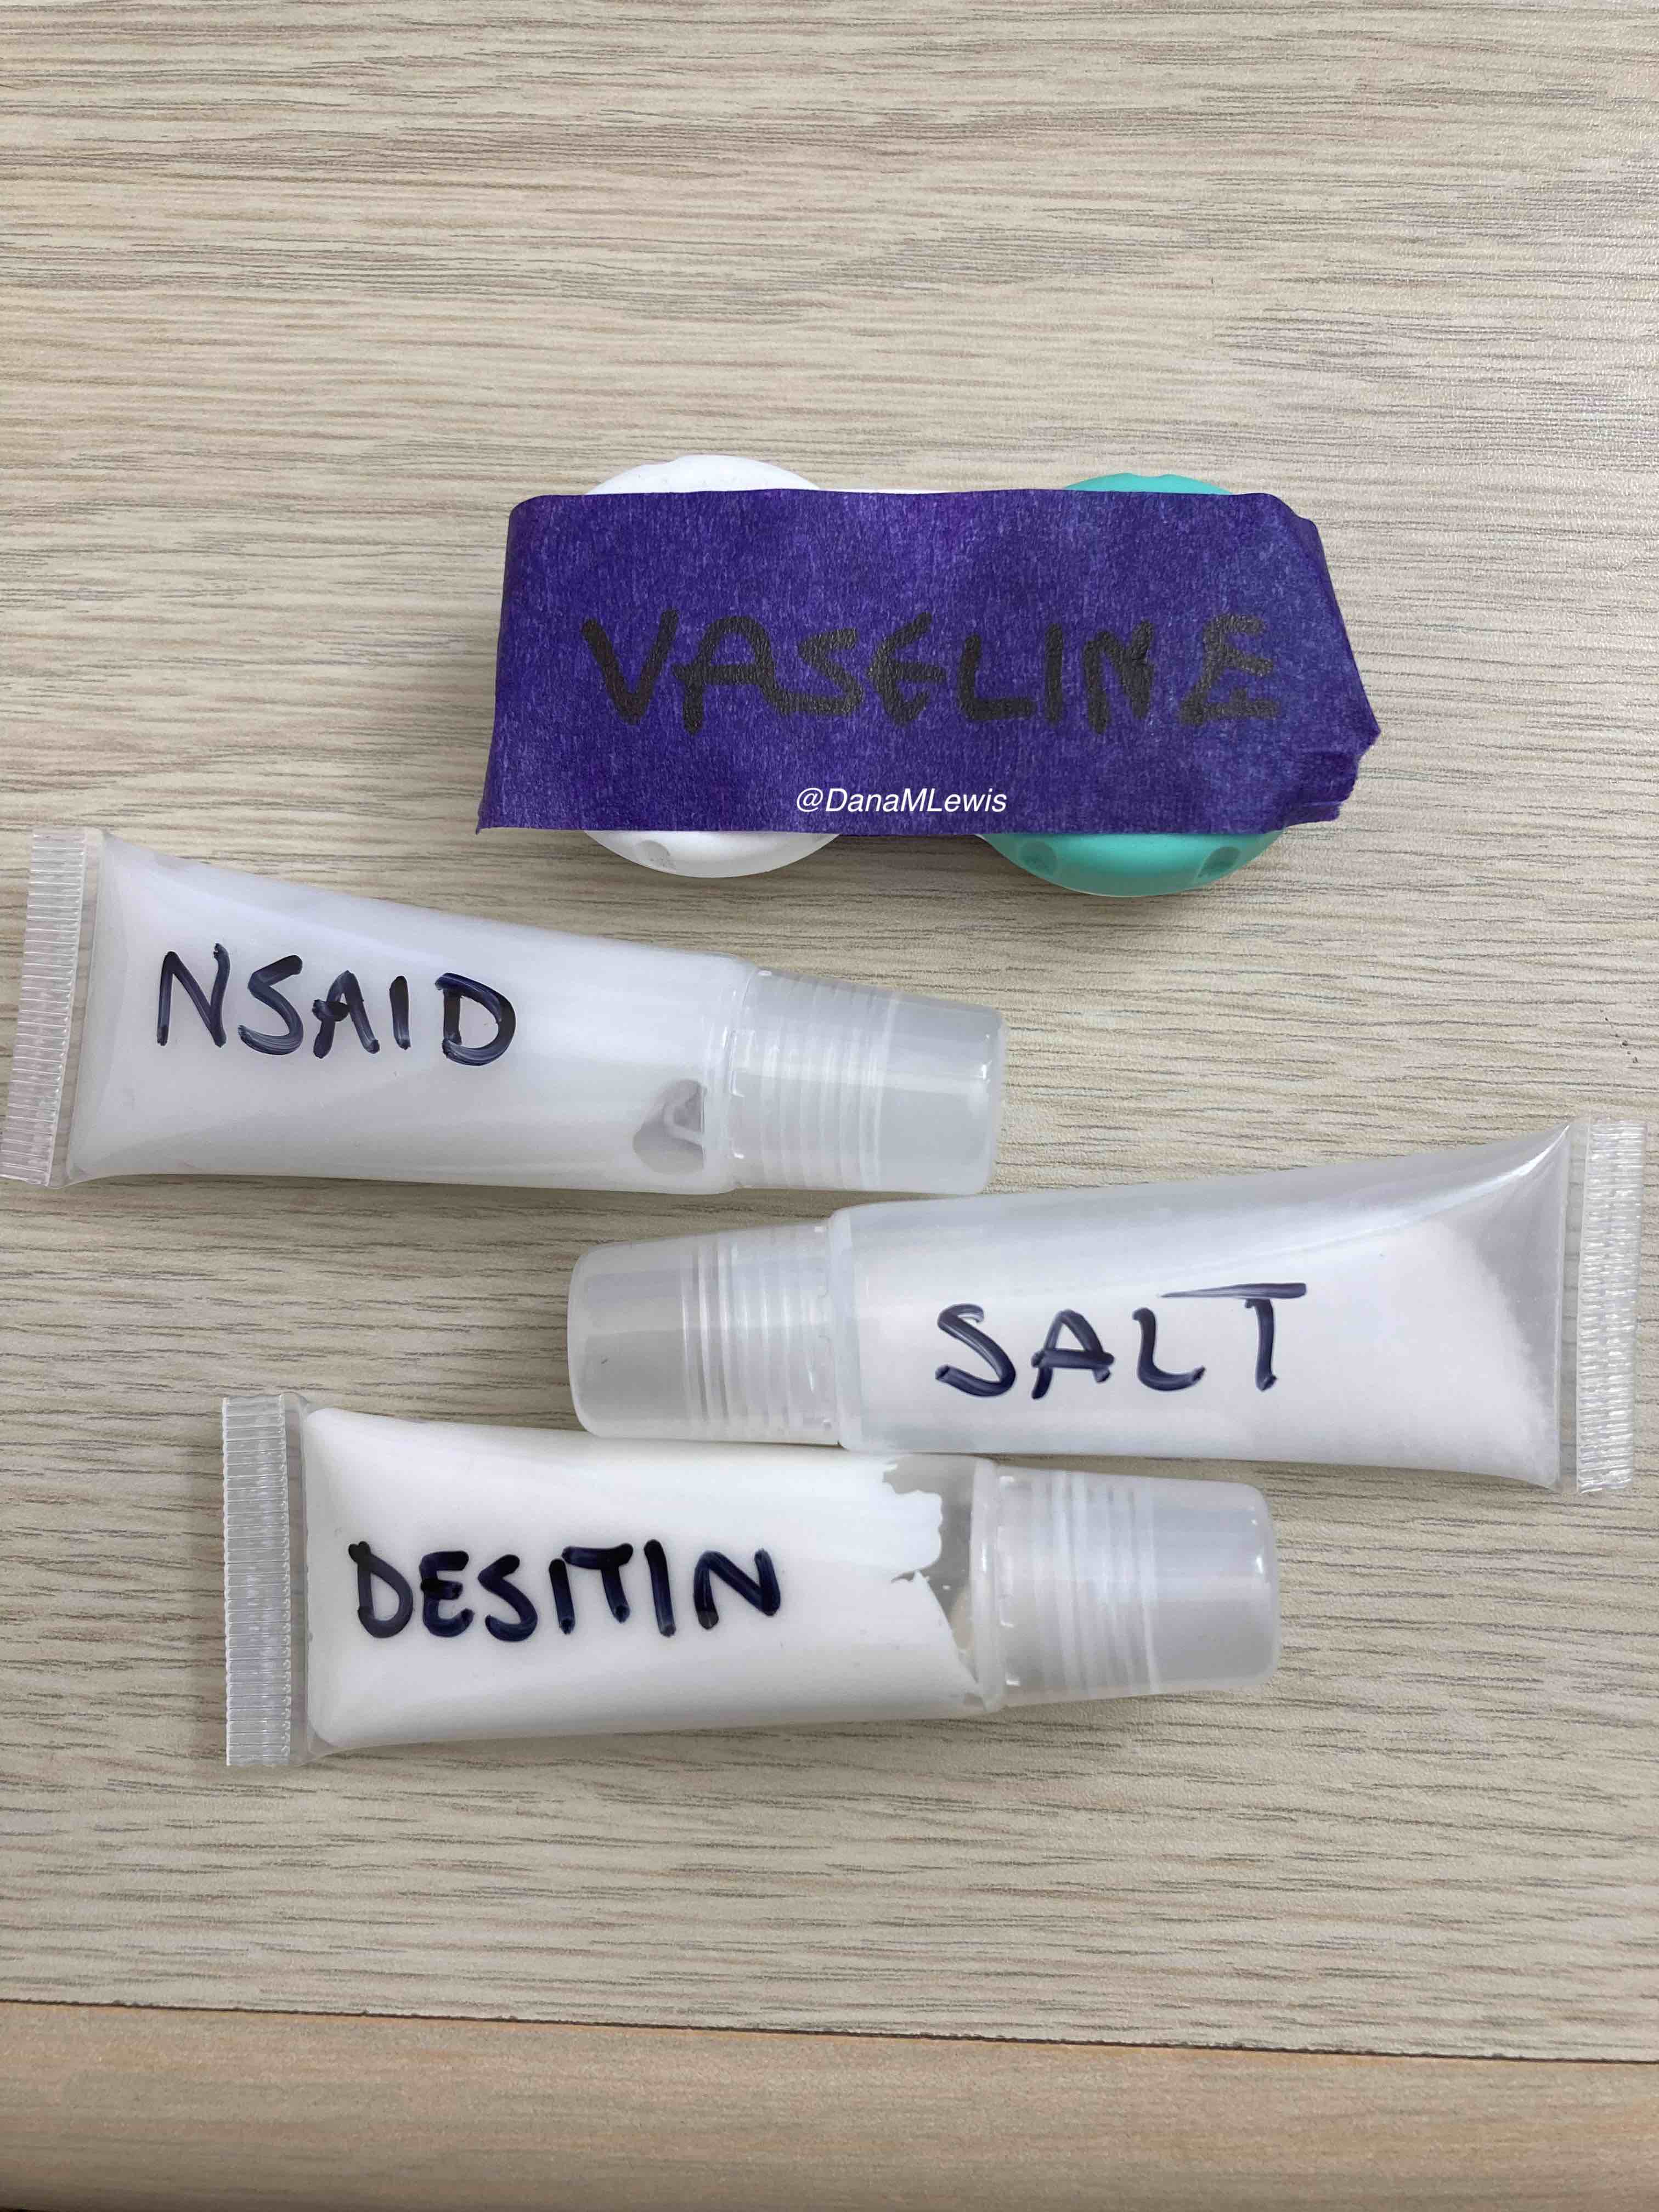 A contact case with a strip of purple painter tape that has "vaseline" written on it in sharpie; and three lip gloss tubes filled and marked with "NSAID", "salt", and "desitin". 